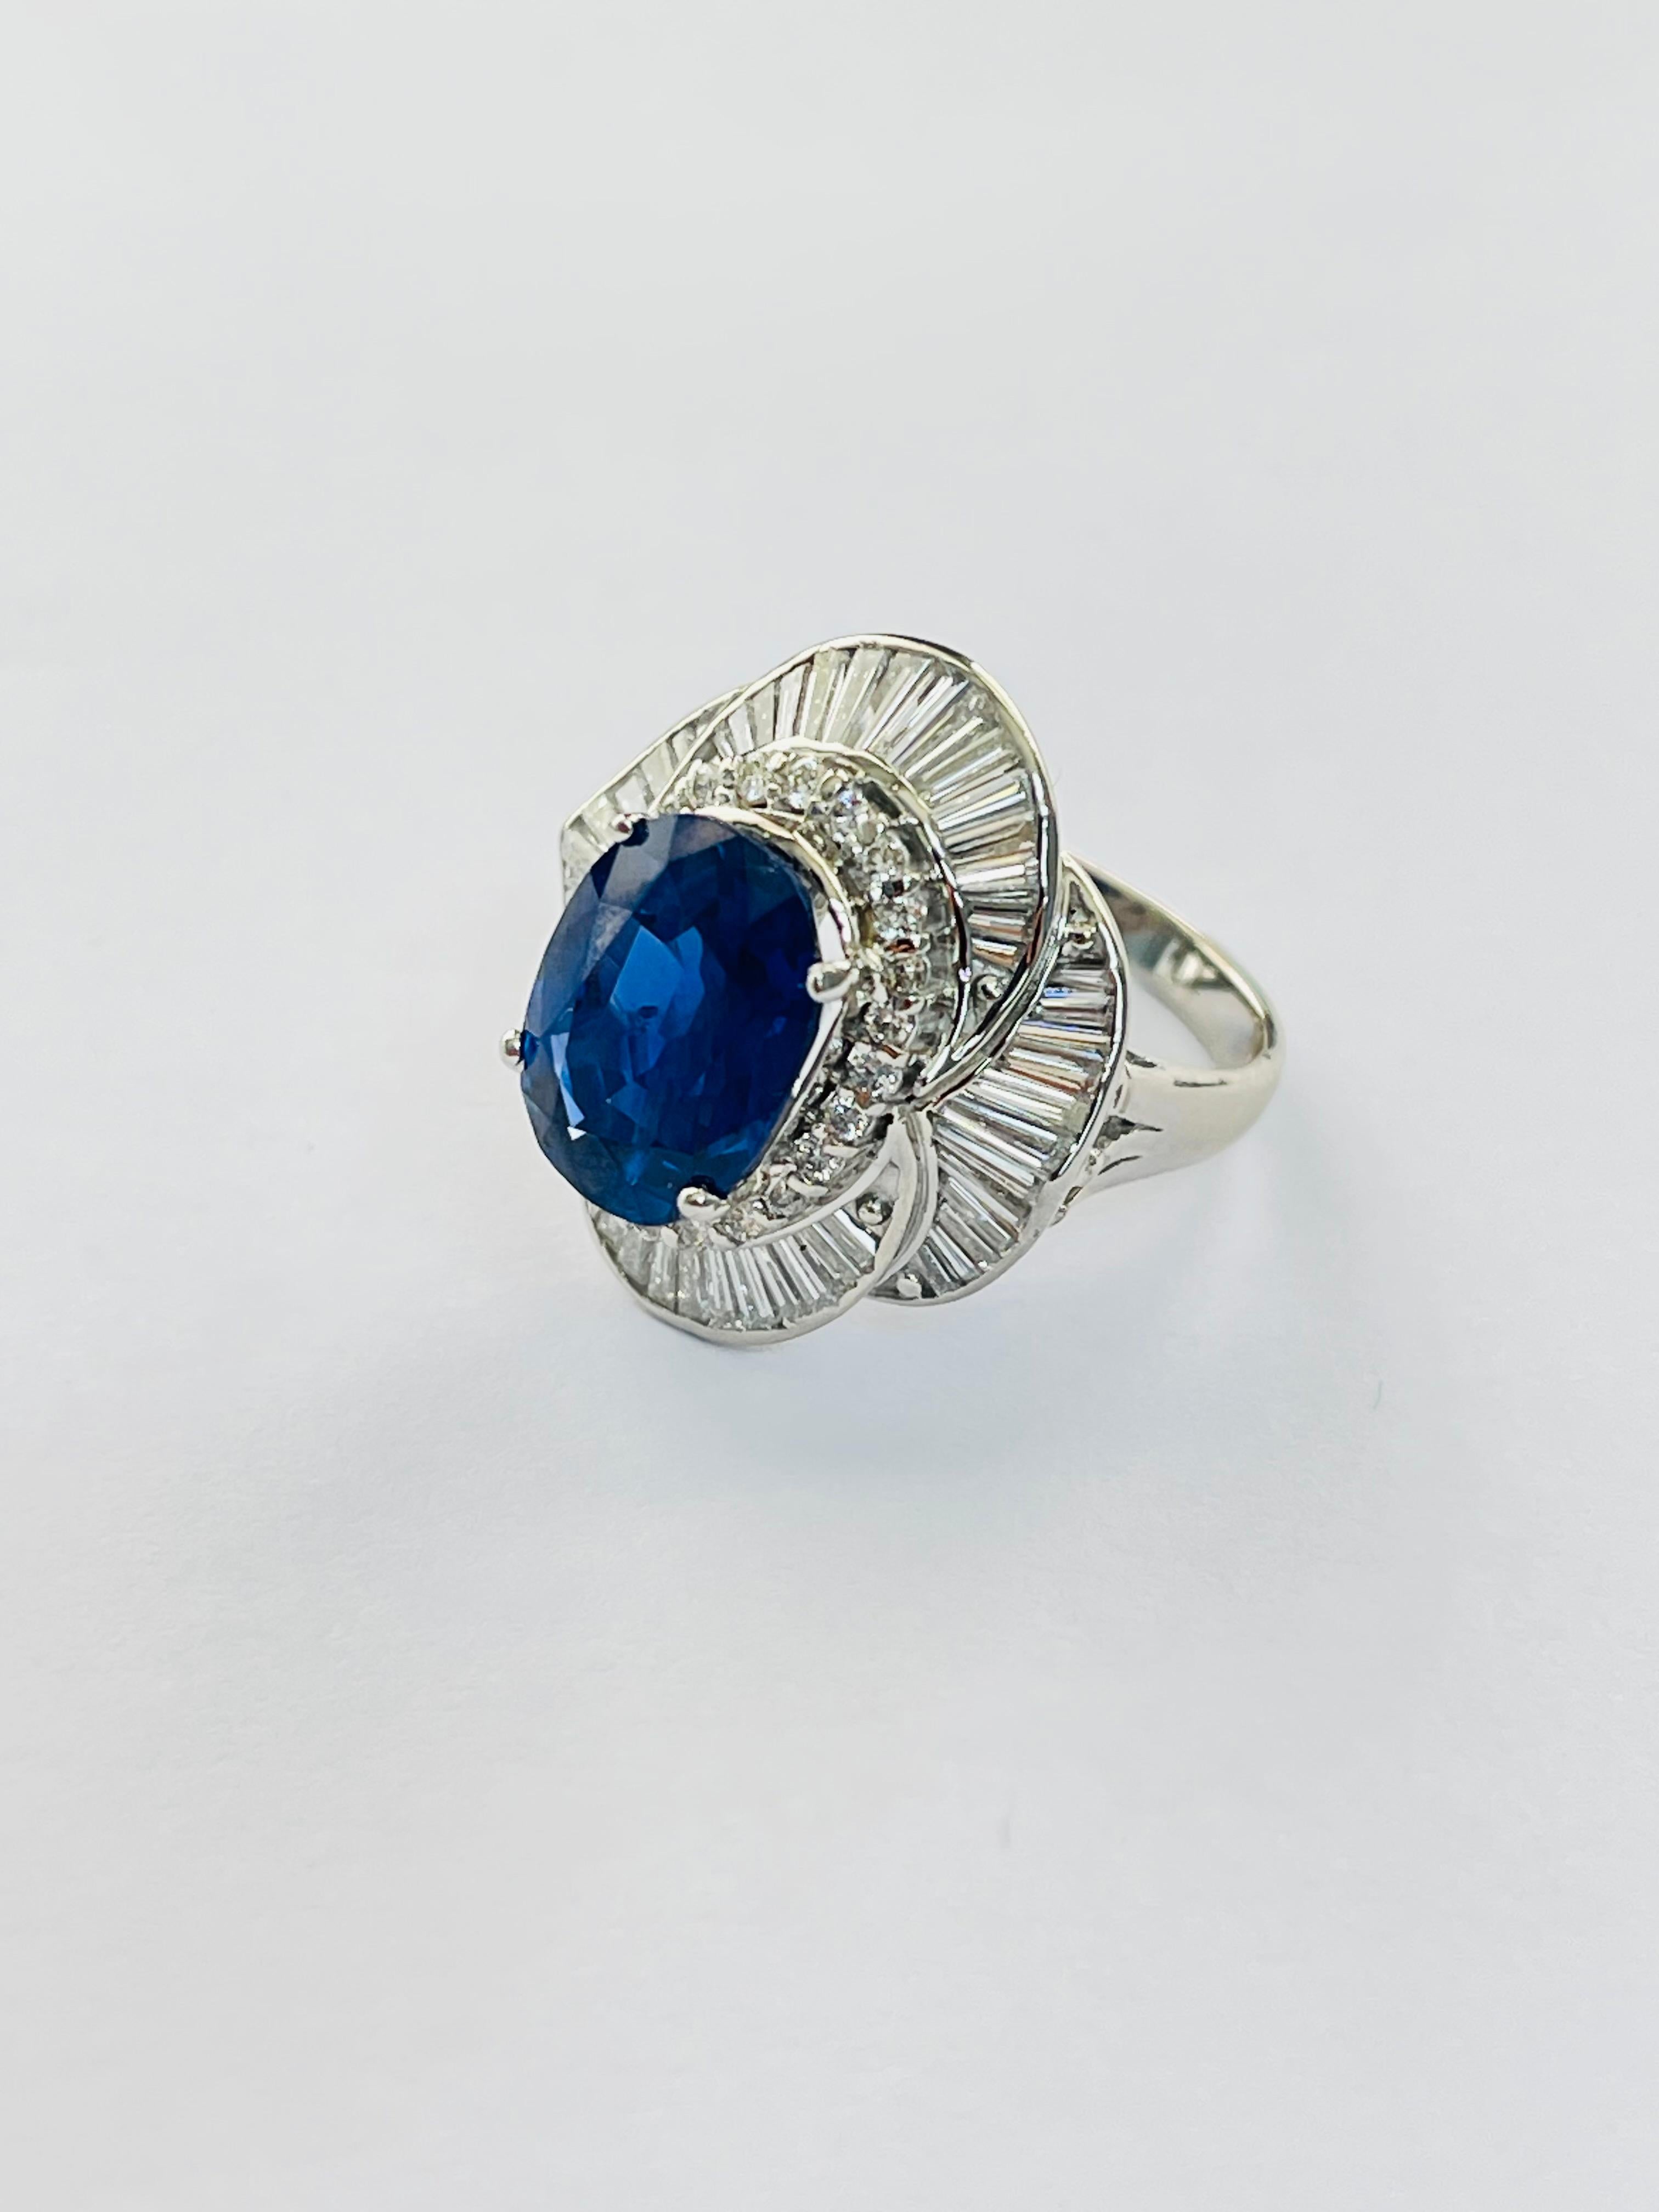 Women's Oval Bue Sapphire Burma No Heat And Diamond Ring In Platinum, SSEF Certified.  For Sale